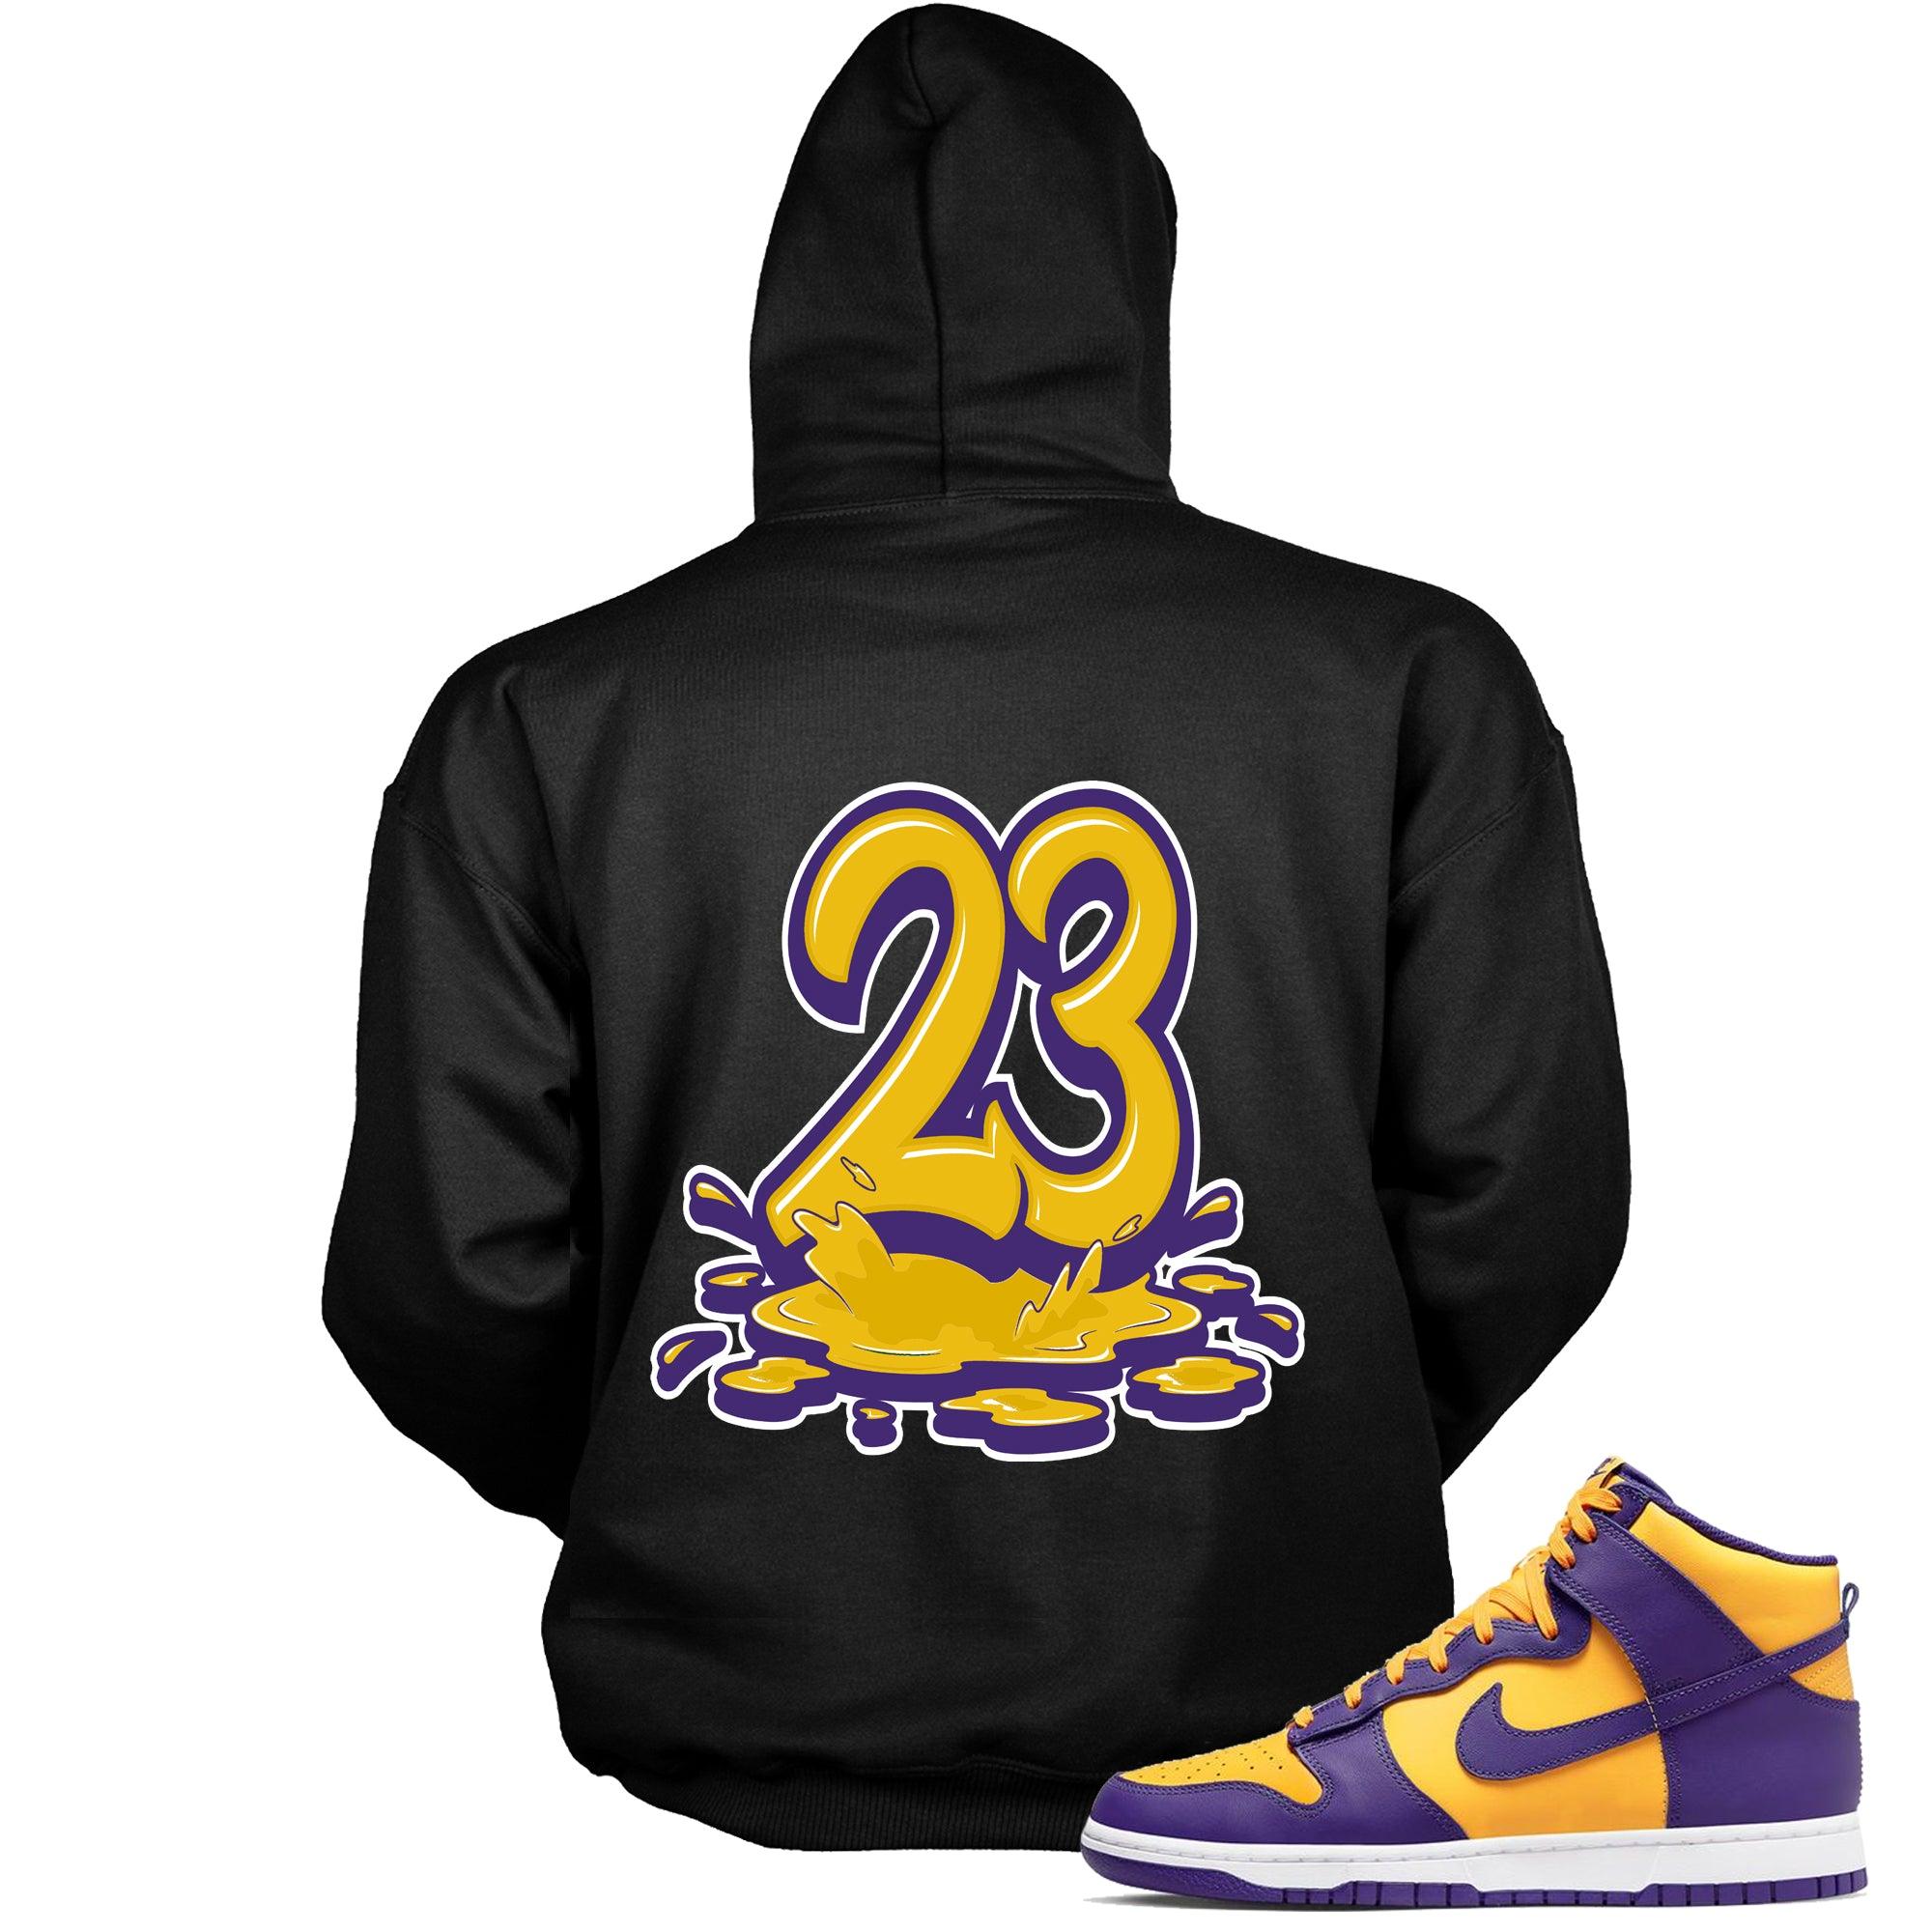 Number 23 Melting Hoodie Nike Dunk High Lakers photo